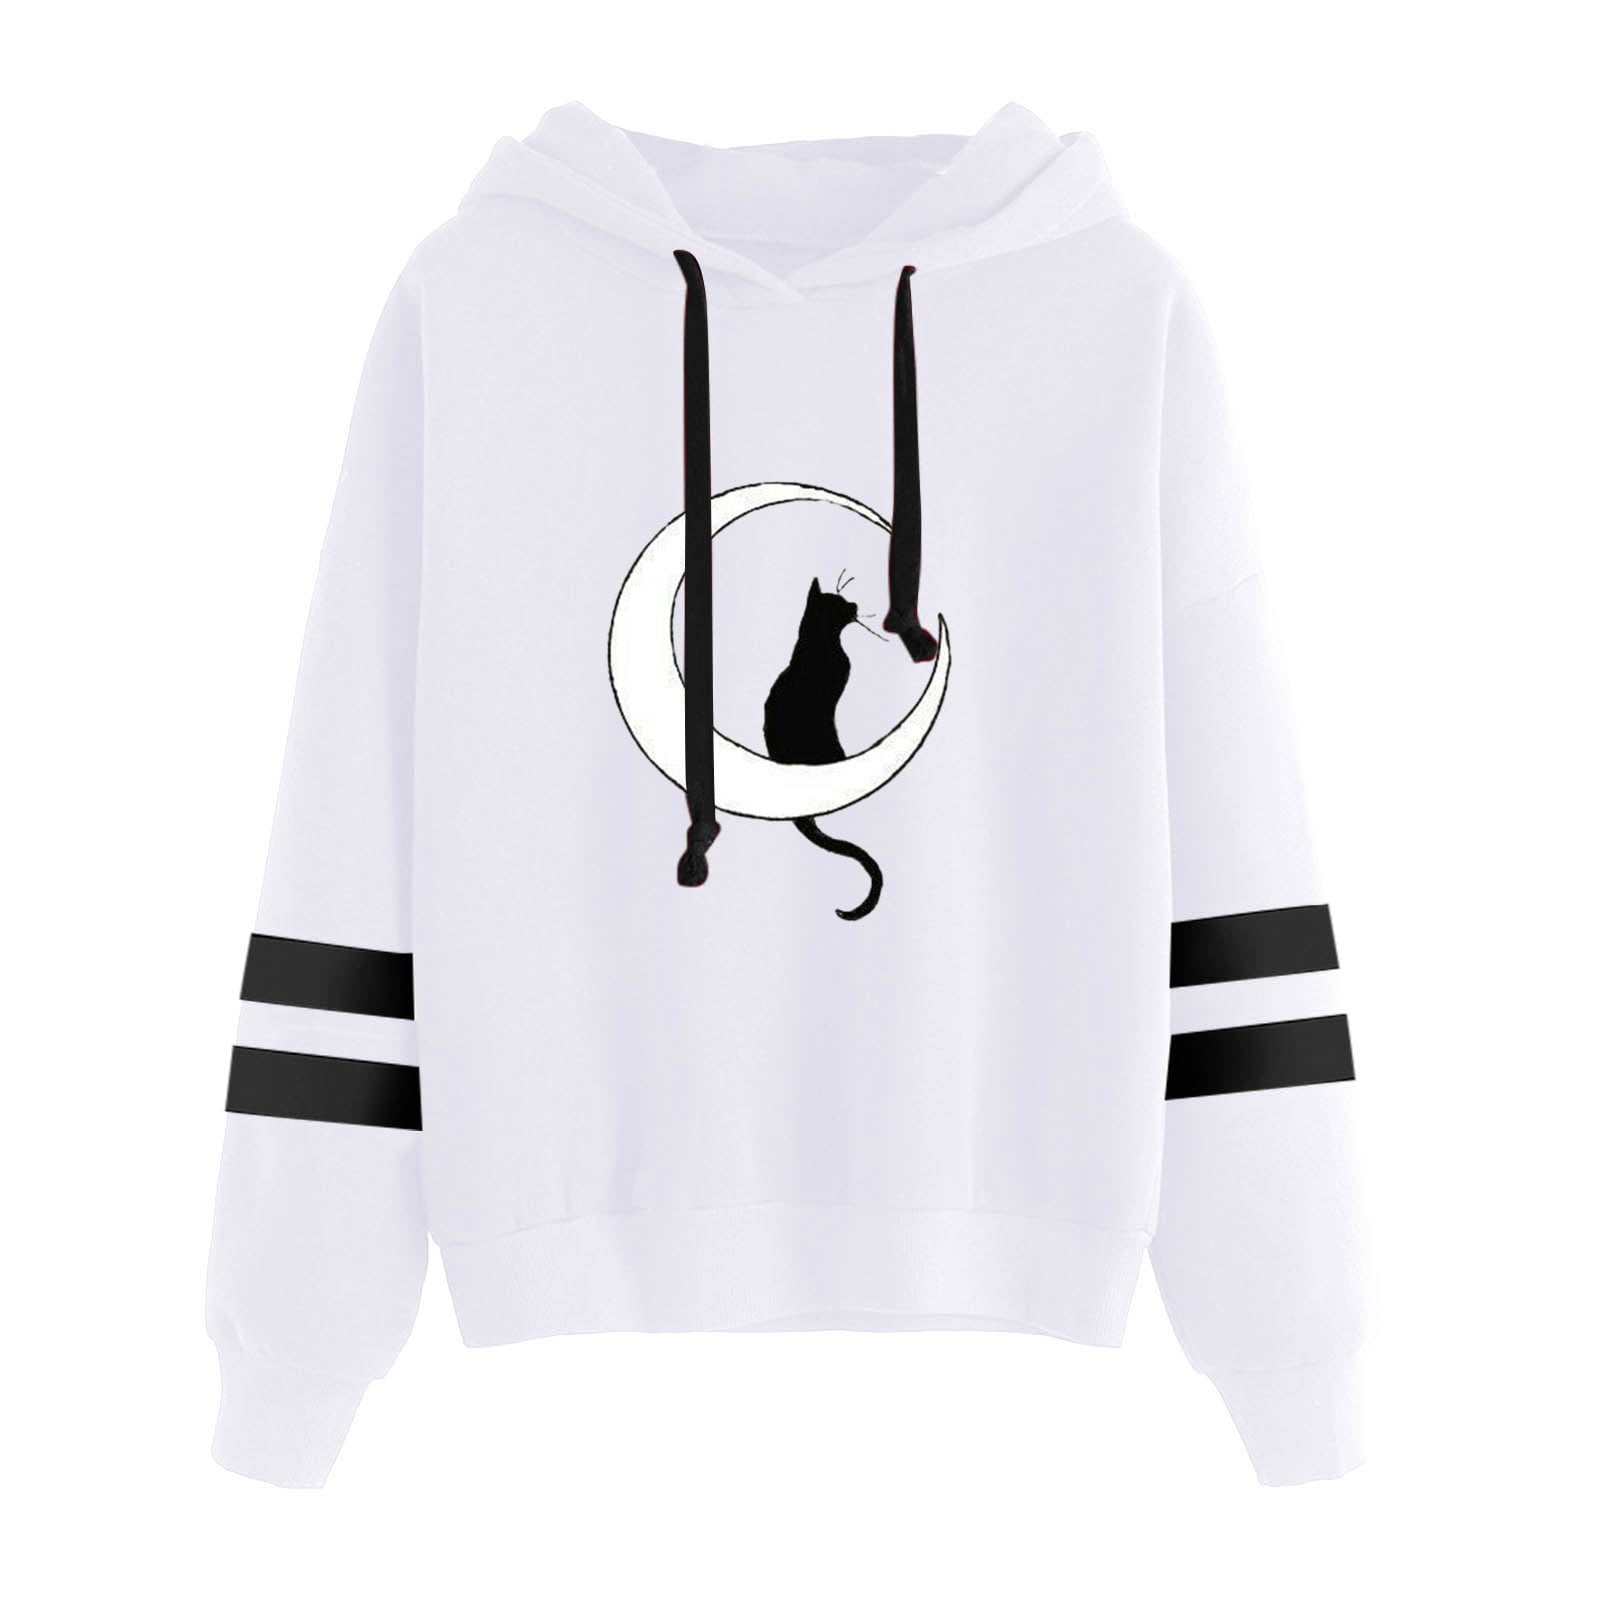 Lastesso Buy Again Orders Placed by Me Hoodies for Women Classiac Stripe  Print Blouse Tops 1/4 Button Collar Drawstring Thin Sweatshirt Soft Going  Out